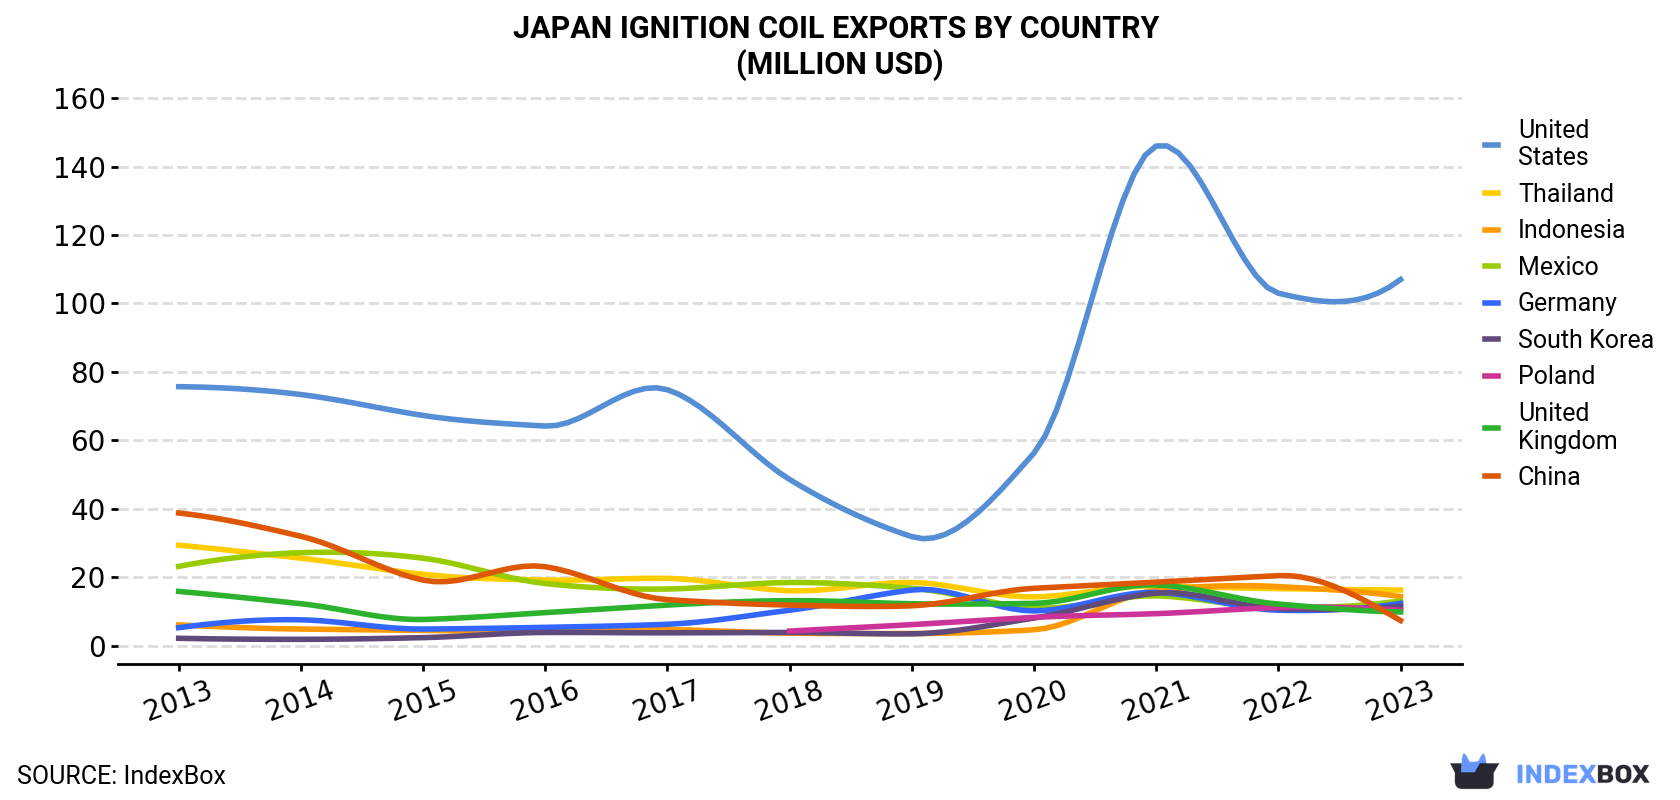 Japan Ignition Coil Exports By Country (Million USD)